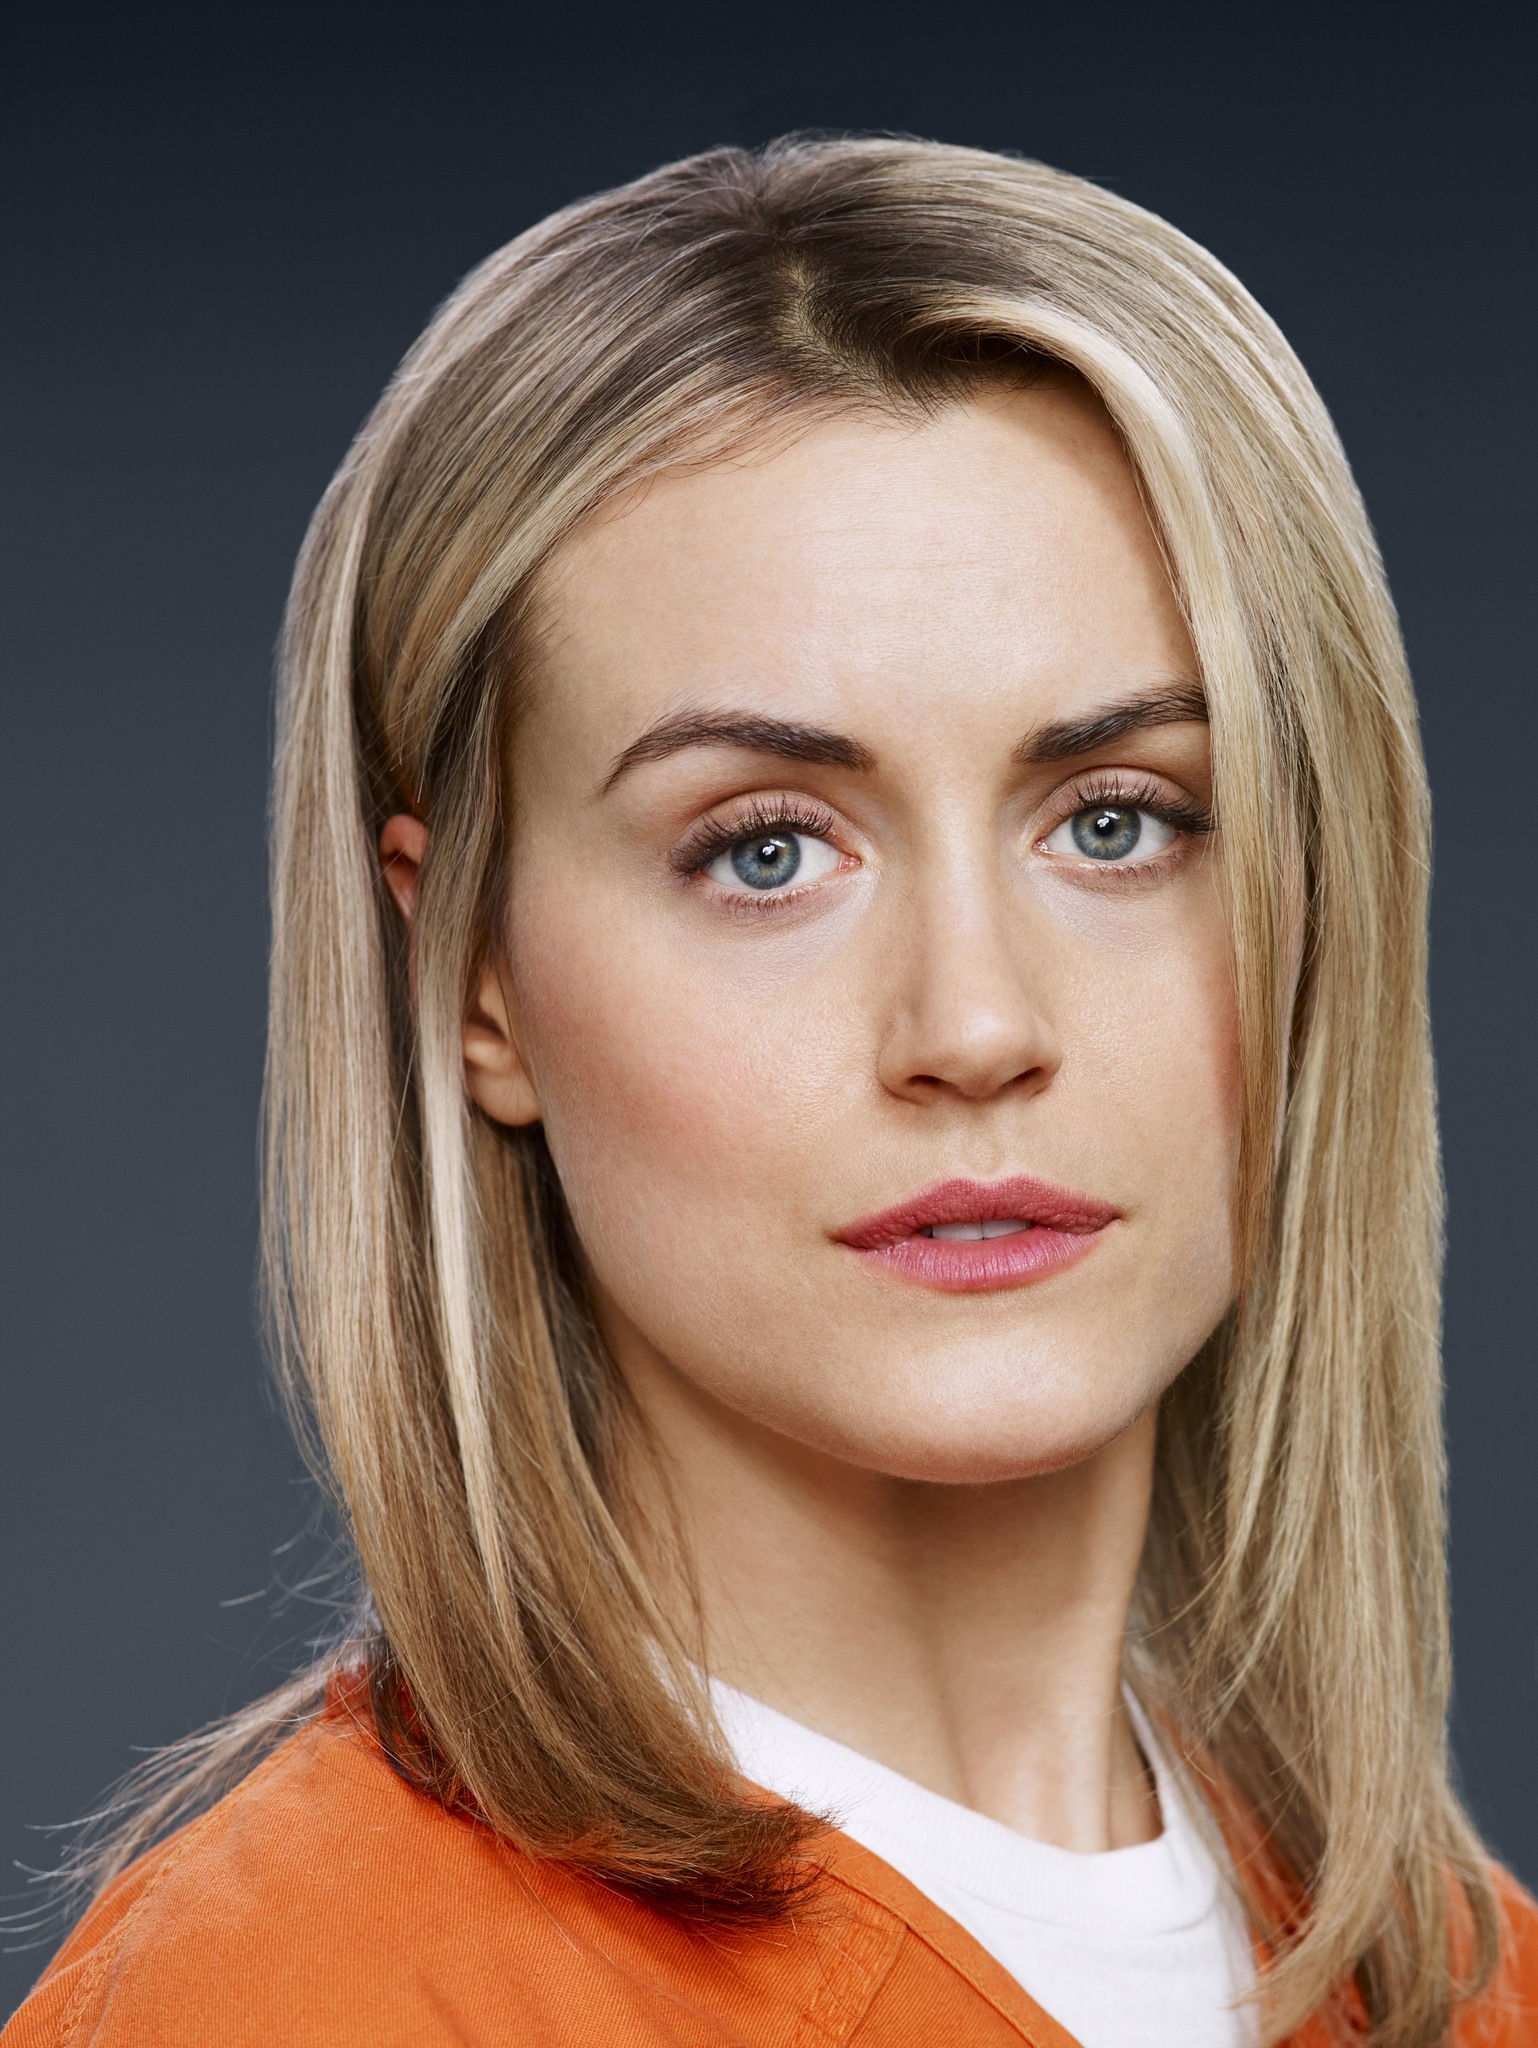 Taylor Schilling in Orange Is the New Black (2013)